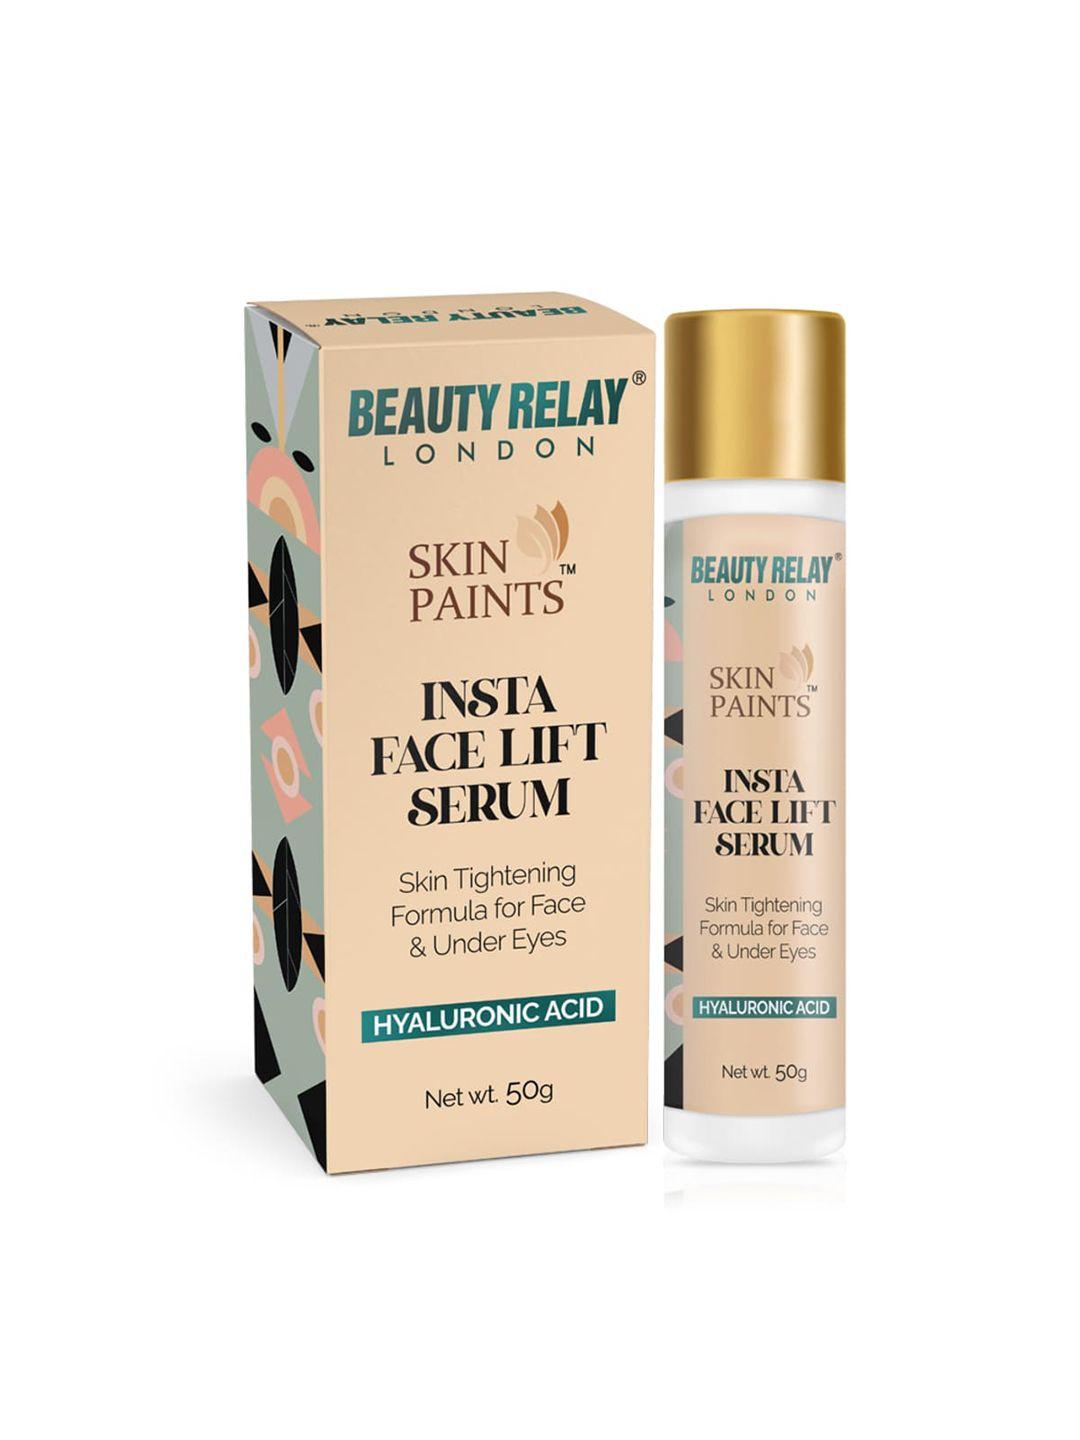 beautyrelay london skin paints insta face lift serum with hyaluronic acid - 50g